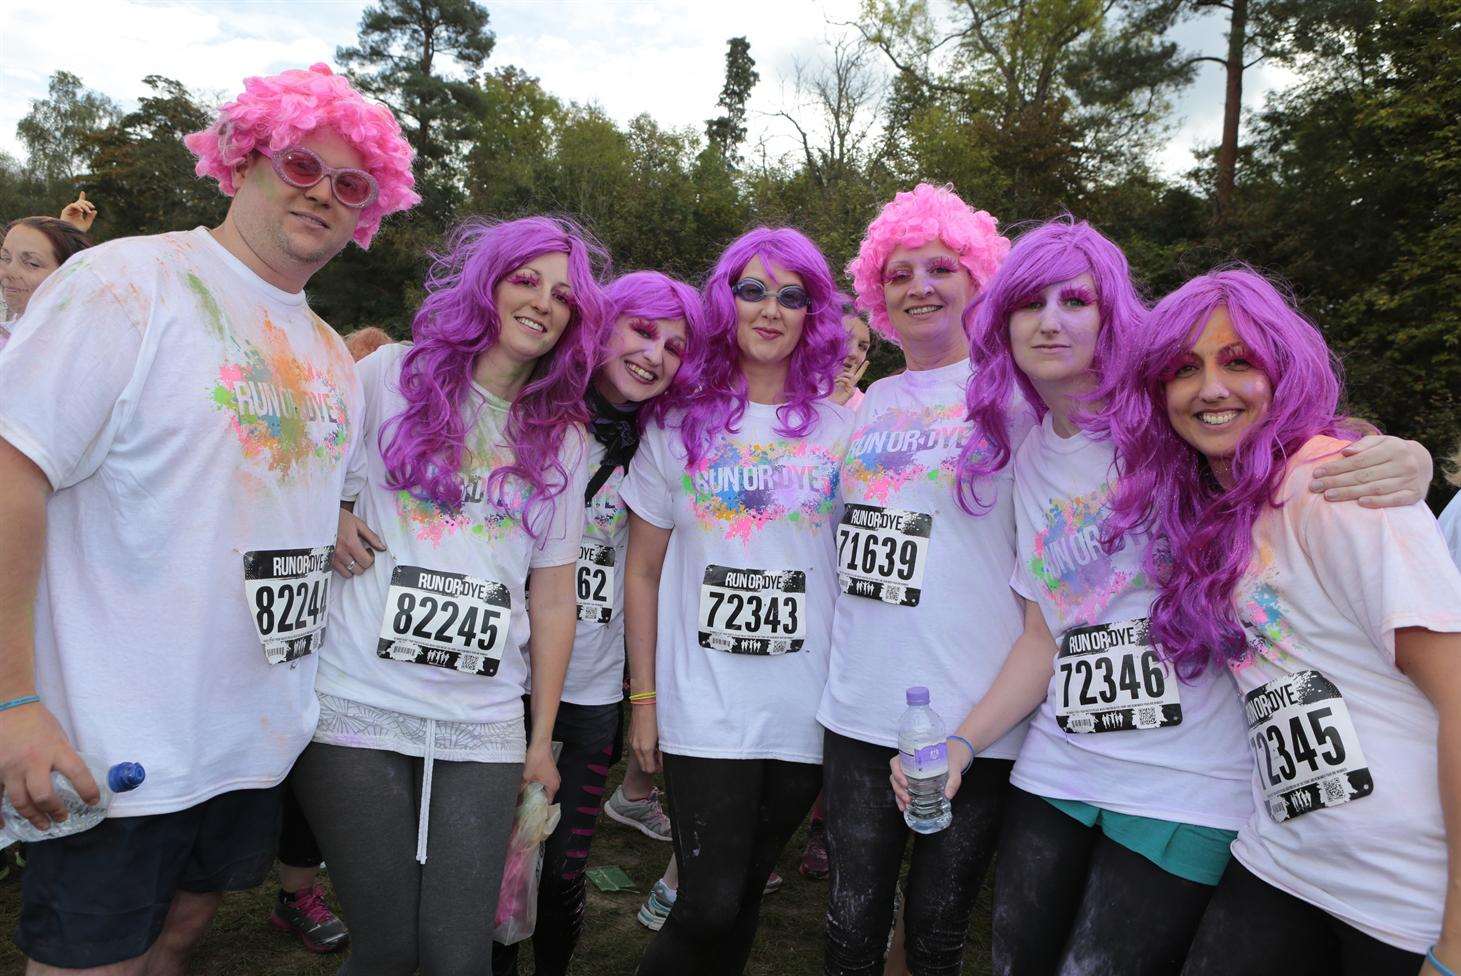 Over 5,000 participants turned up for the 5km Run or Dye last year. Picture: Martin Apps